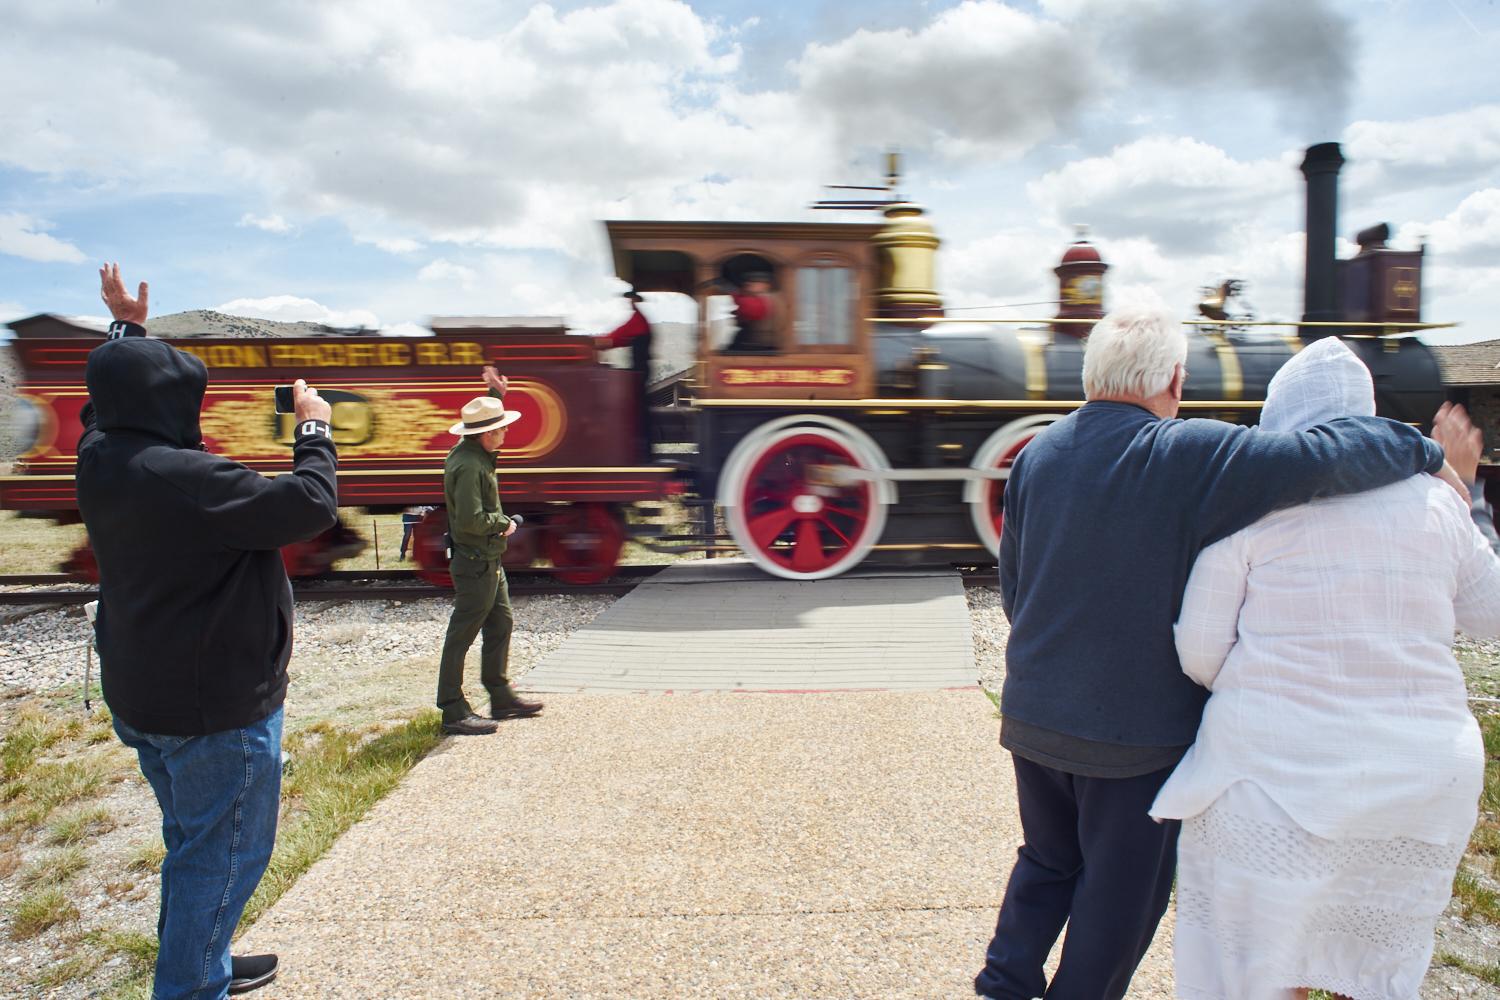 The Weird, Wonderful--and Dying--Great Salt Lake - Visitors watch a re-enactment involving replica trains used in the transcontinental railroad at...